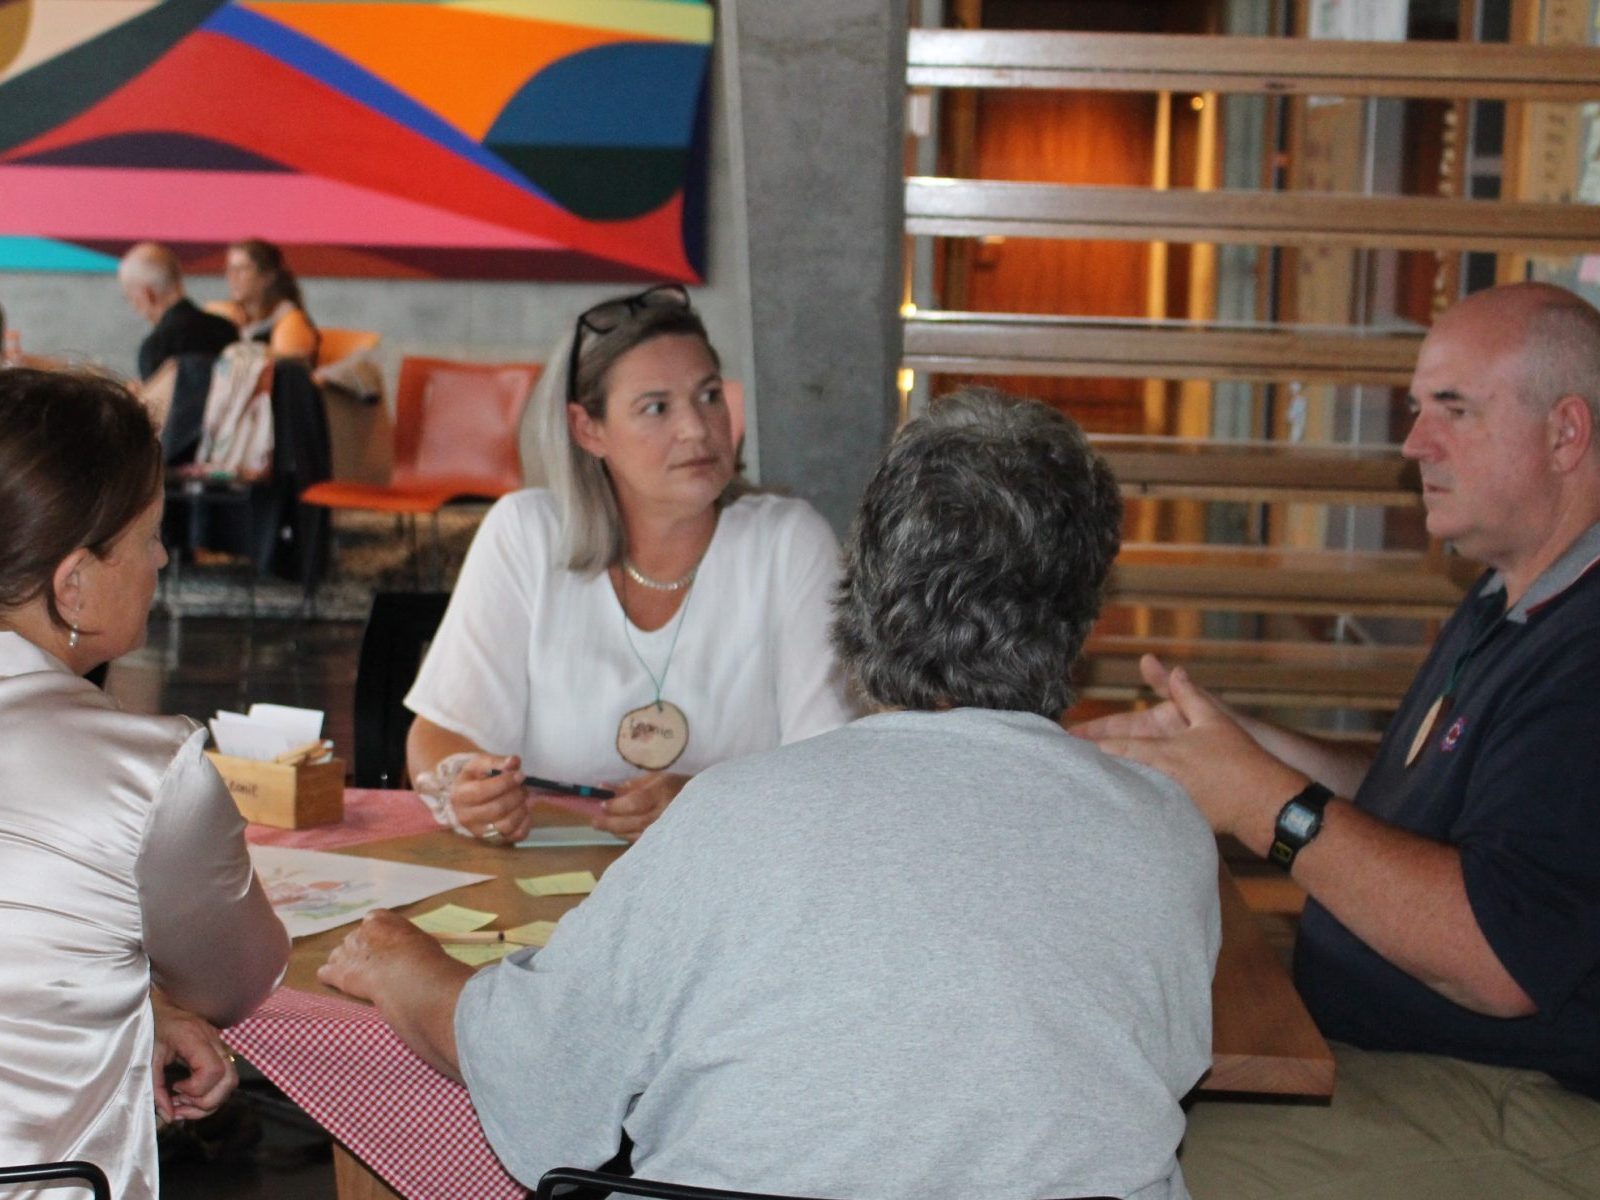 a group of people in discussion around a table with post it notes